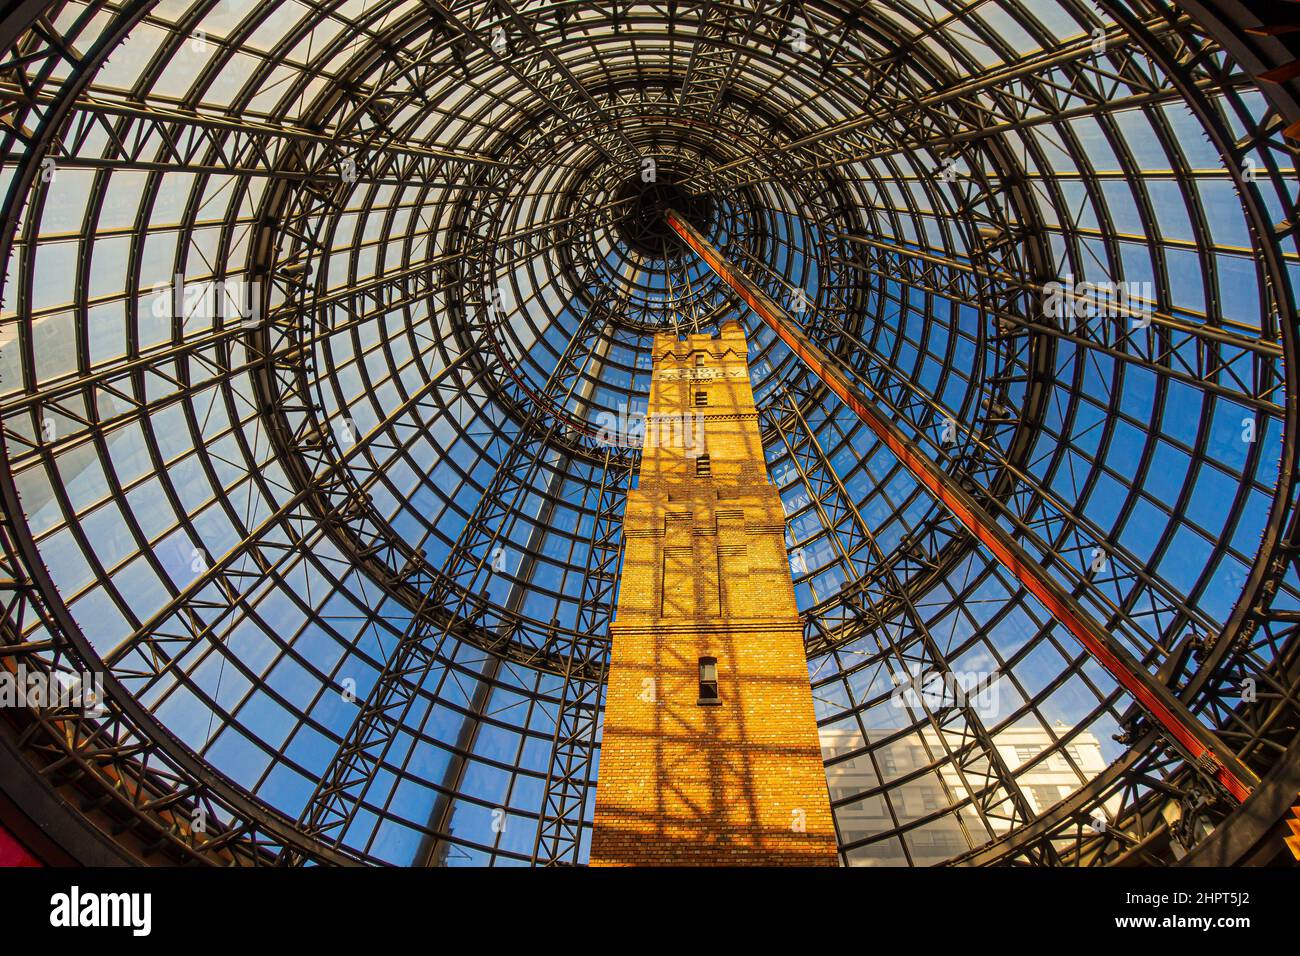 Melbourne, Victoria, Australia - Melbourne Central shopping centre by Kisho Kurokawa - Coop's Shot Tower and glass dome Stock Photo